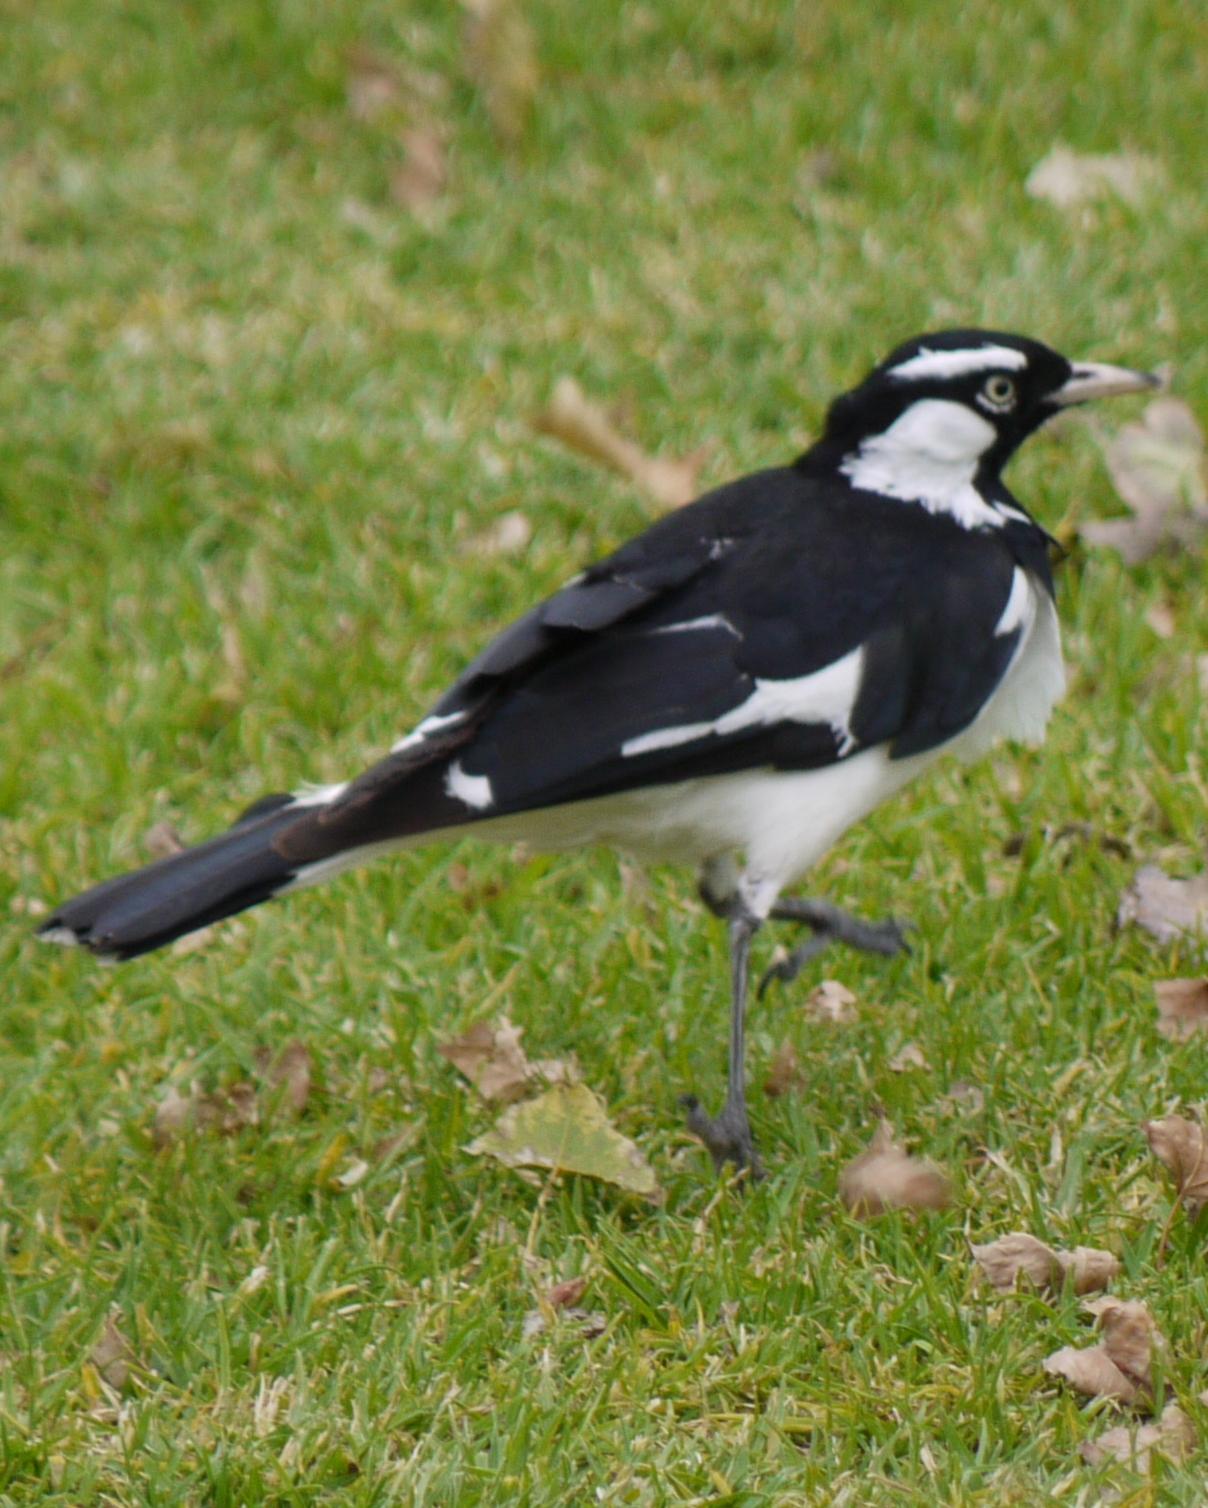 Magpie-lark Photo by Peter Lowe